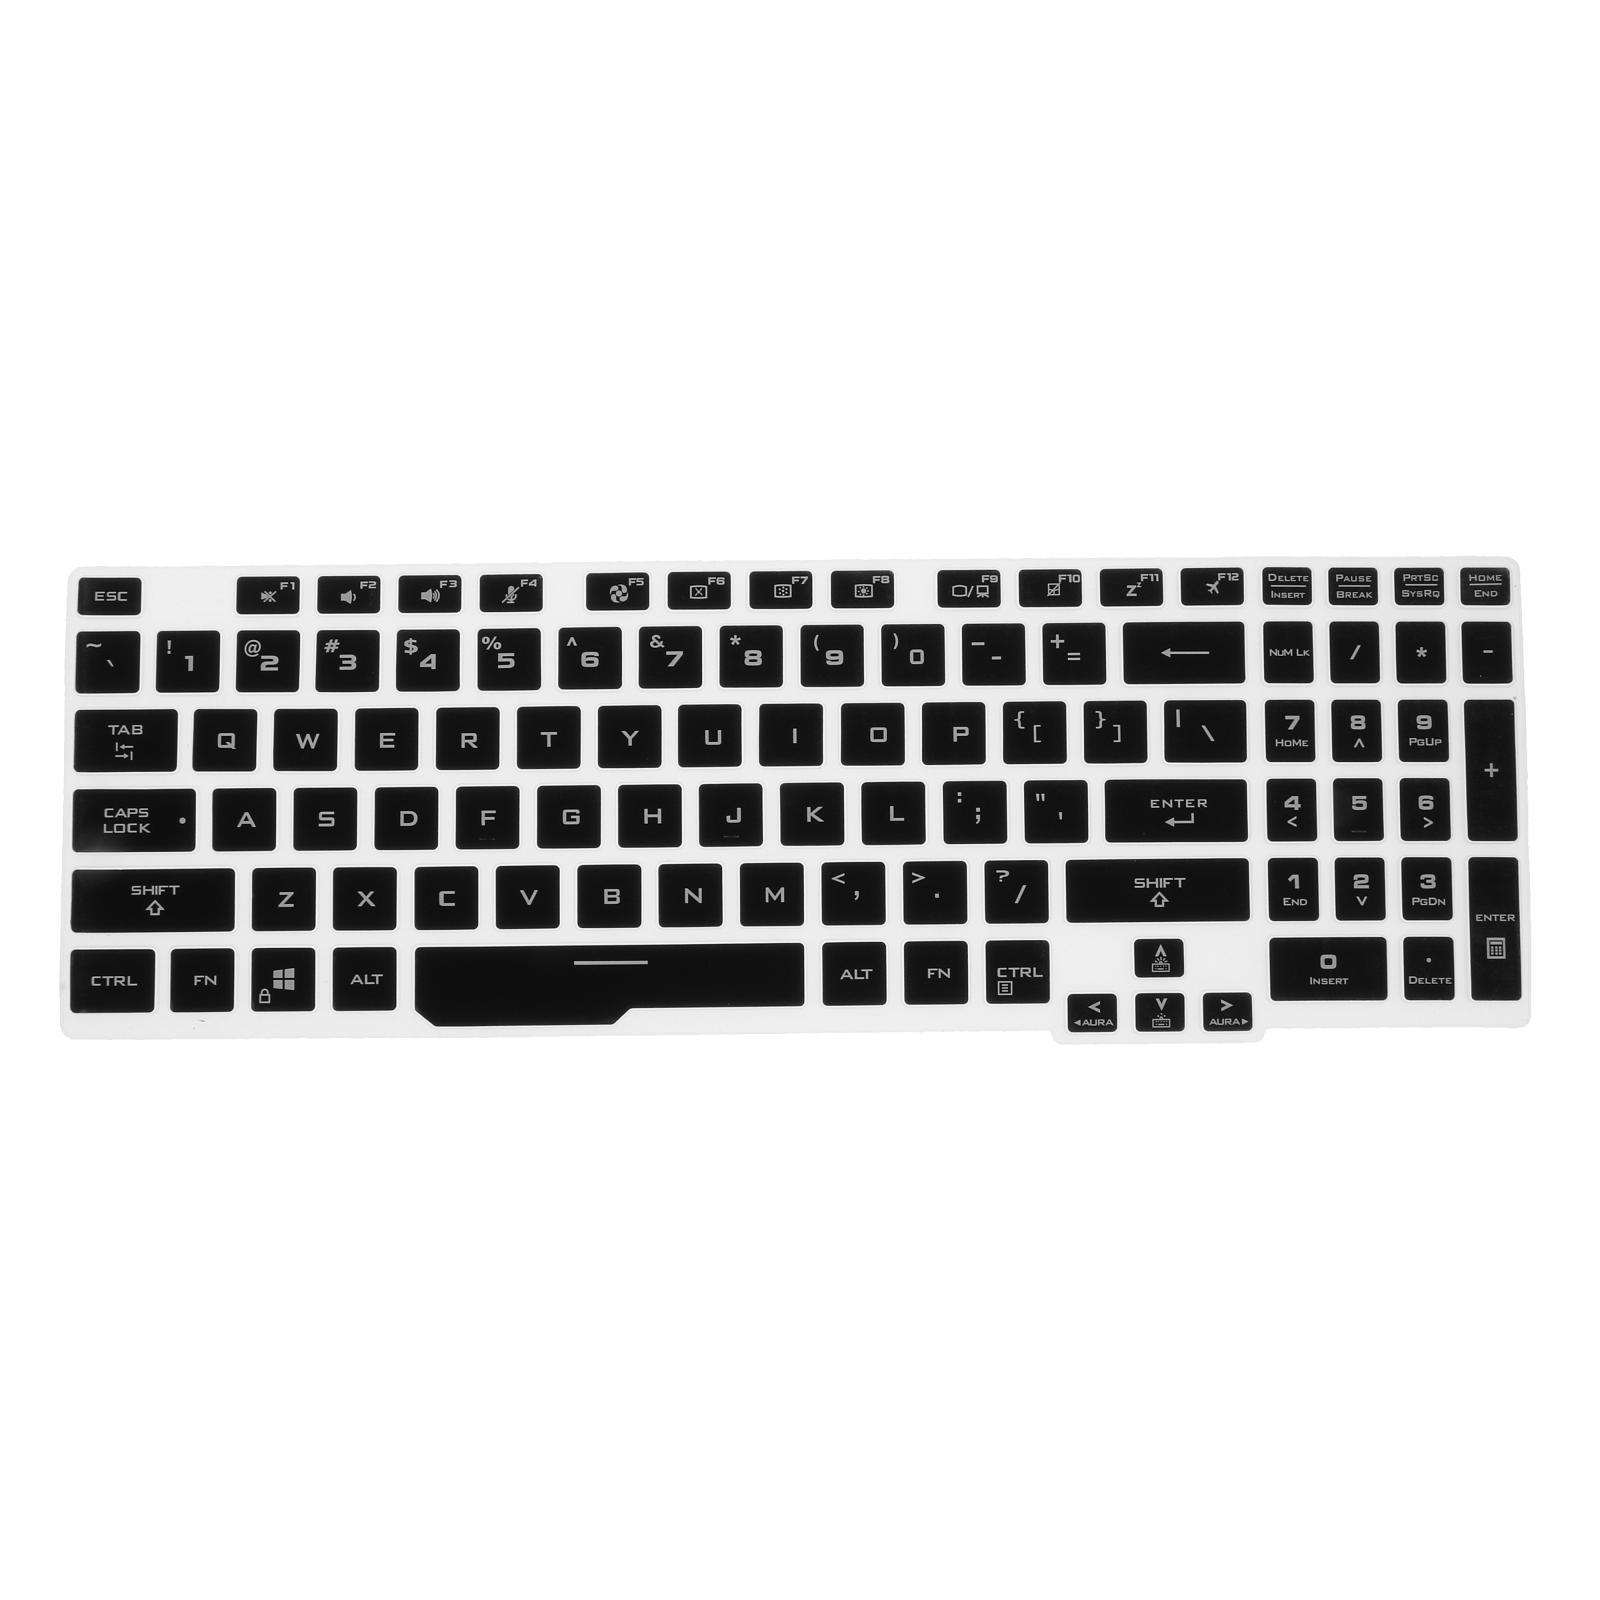 Keyboard Protector Skin Universal for  A15 Laptop Accessories